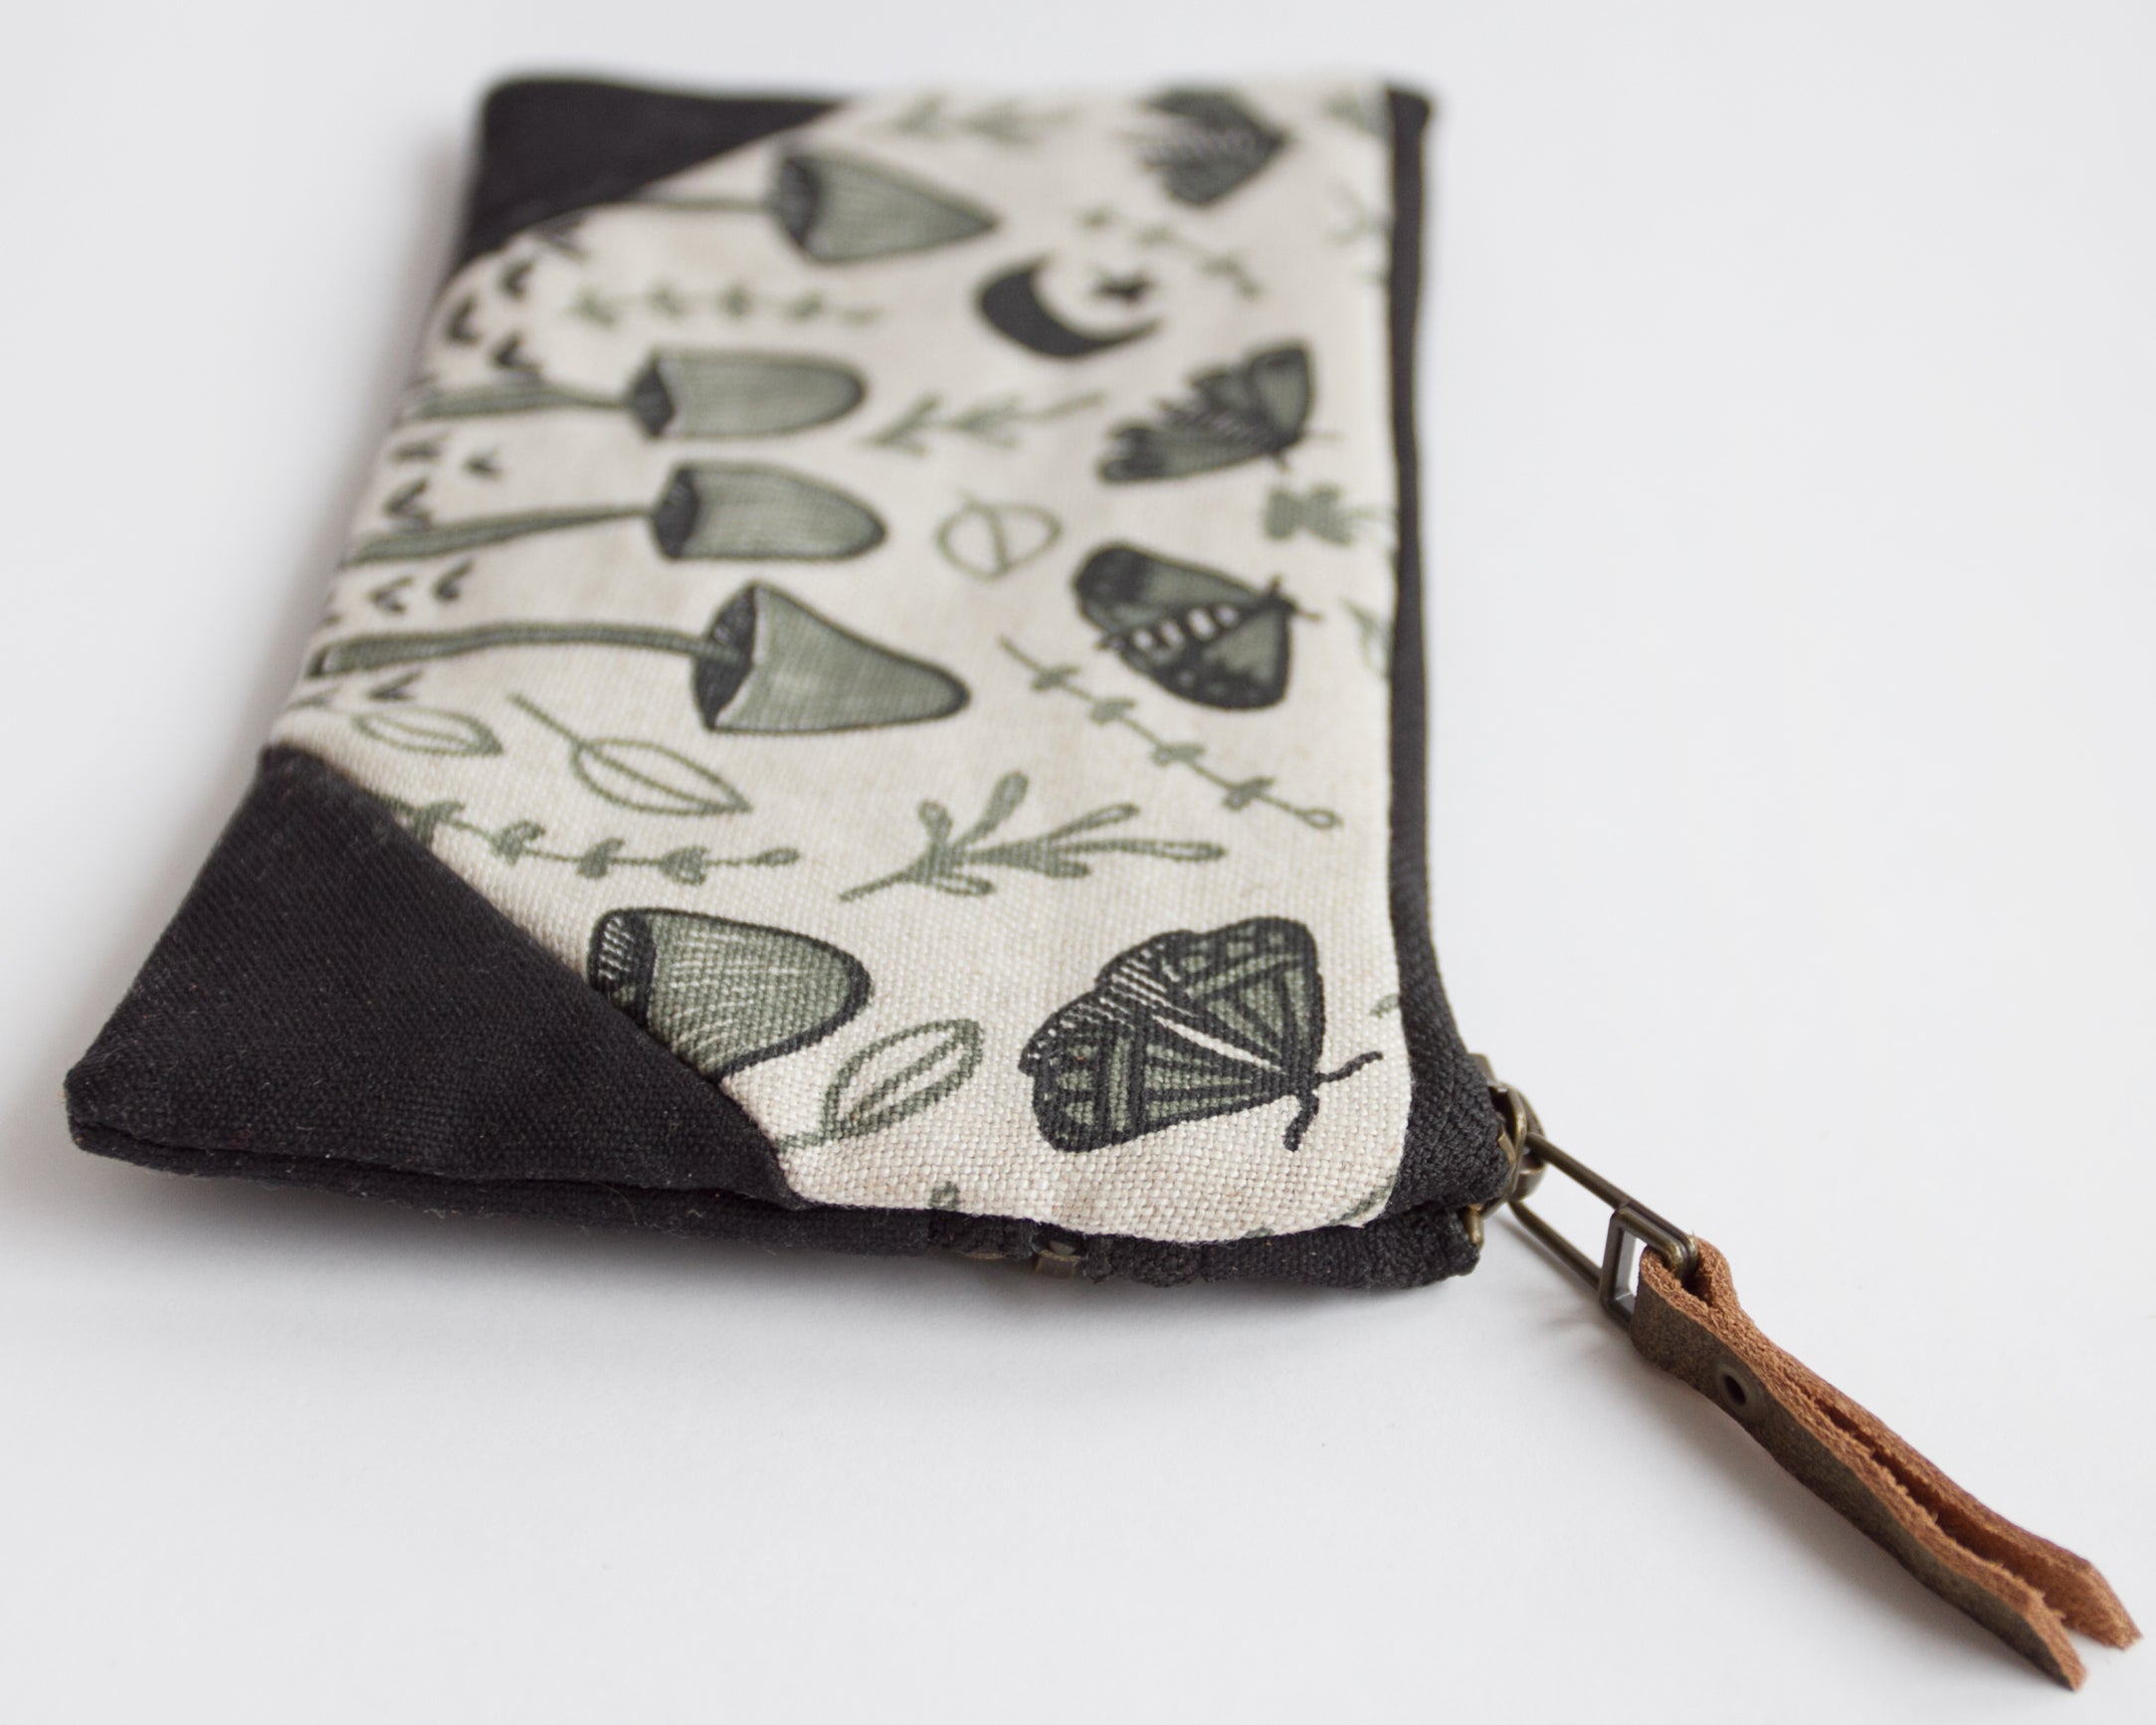 Small Double-Zipper Pouch - Mushrooms and Moths - Seafoam